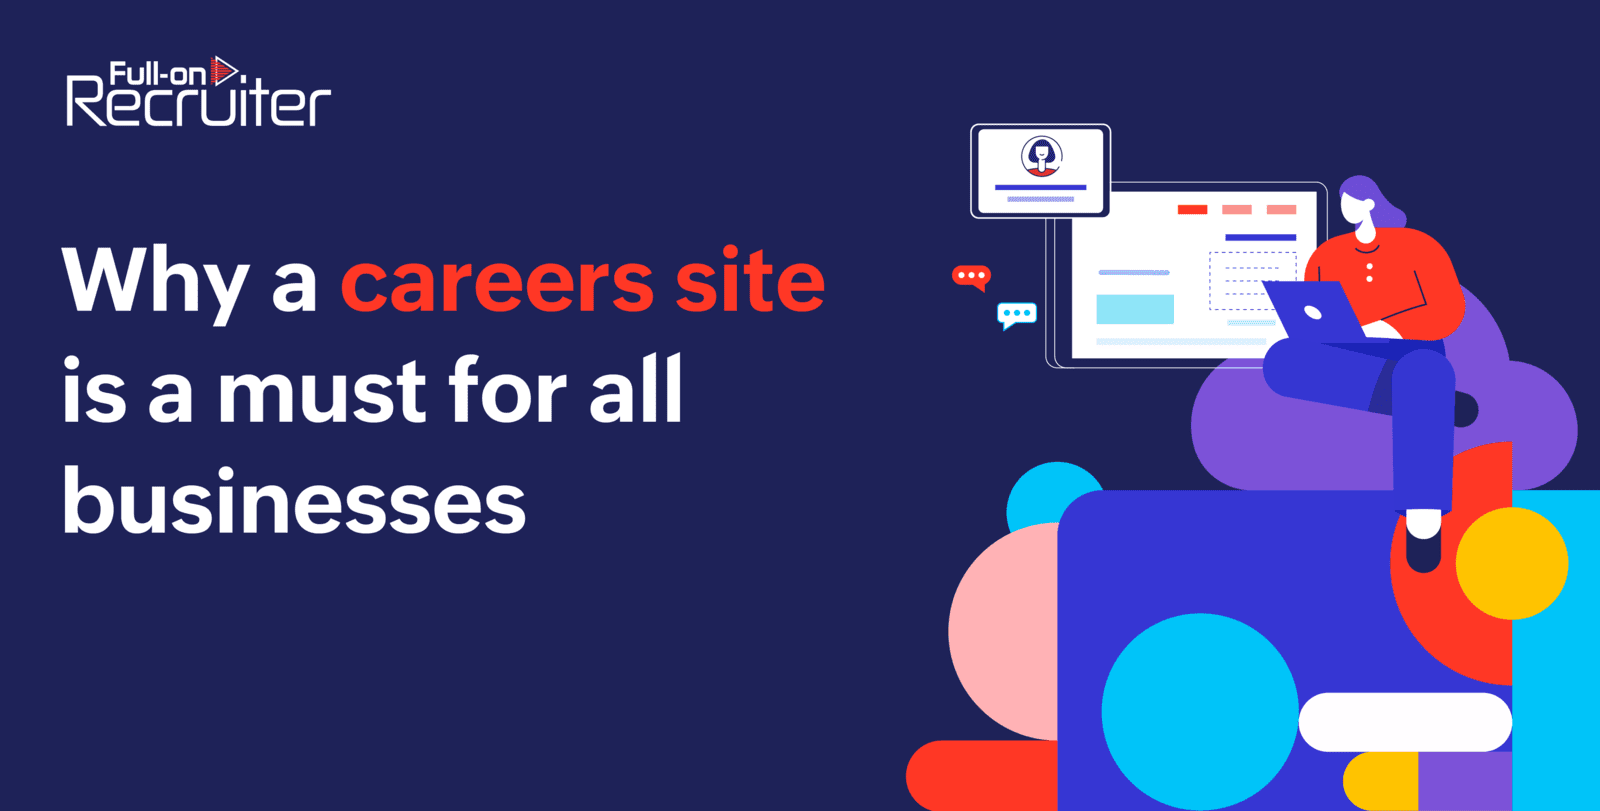 Why a careers site is a must for all businesses